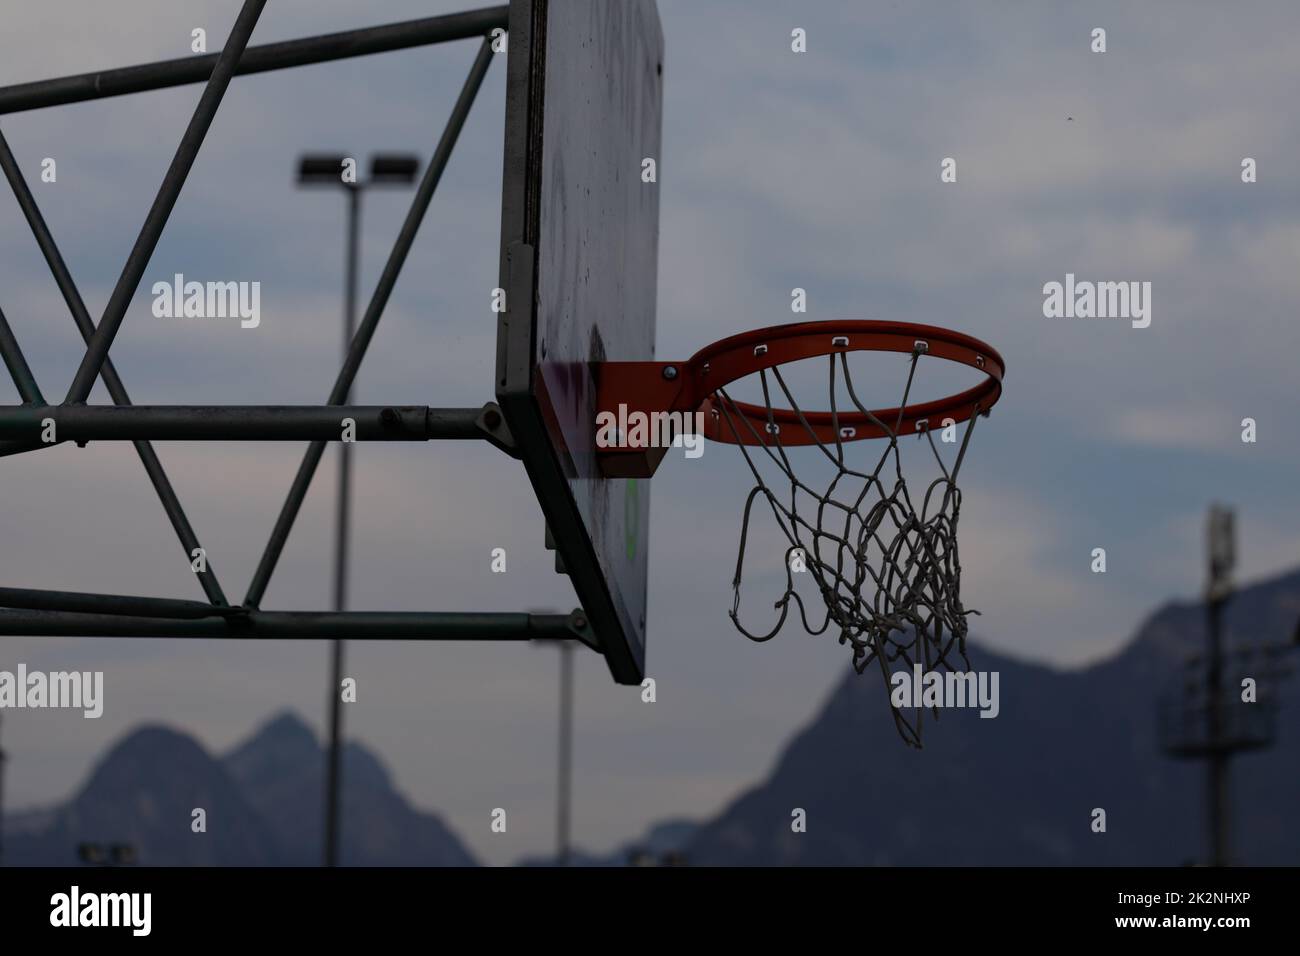 Goal post, hoop and net on a basketball court Stock Photo